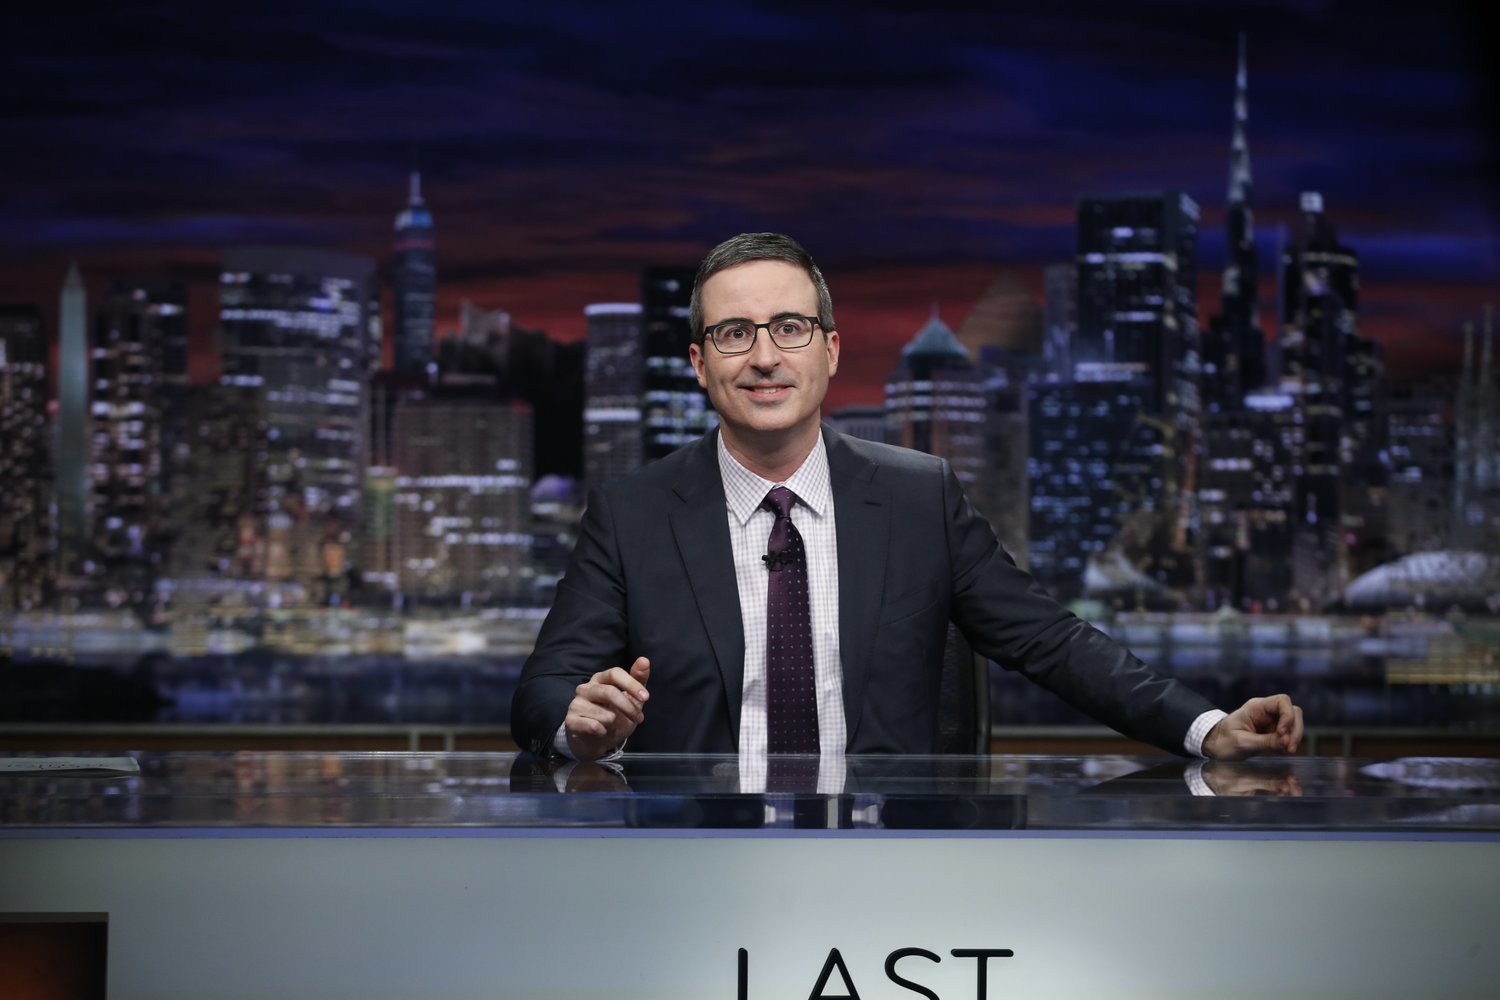 VIDEO Watch Last Night's Episode of LAST WEEK TONIGHT WITH JOHN OLIVER